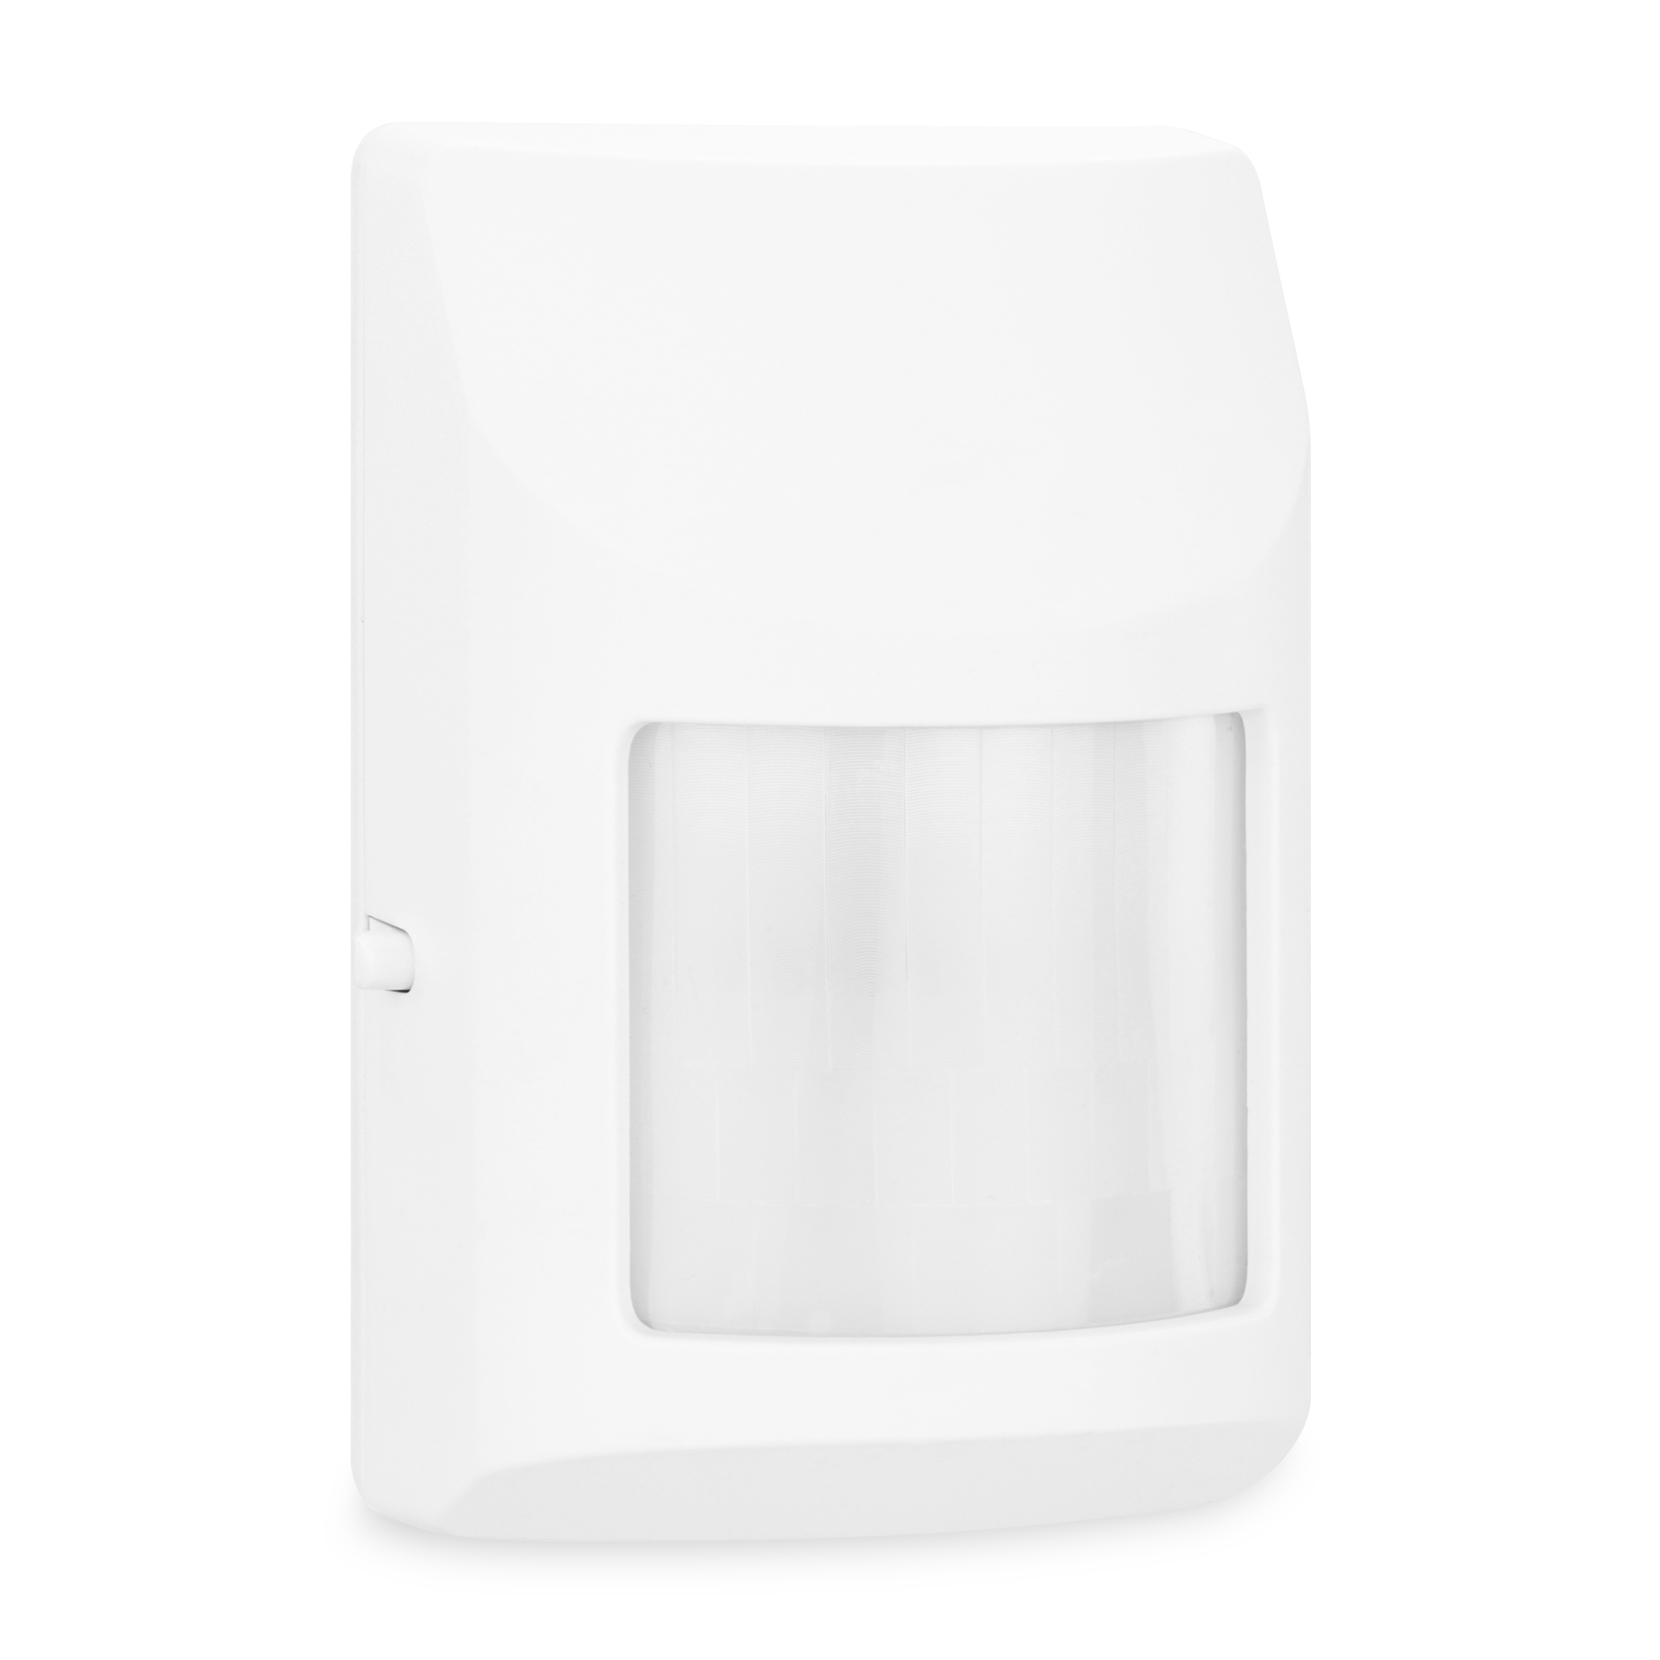 Thumbnail image of Samsung SmartThings ADT Motion Detector